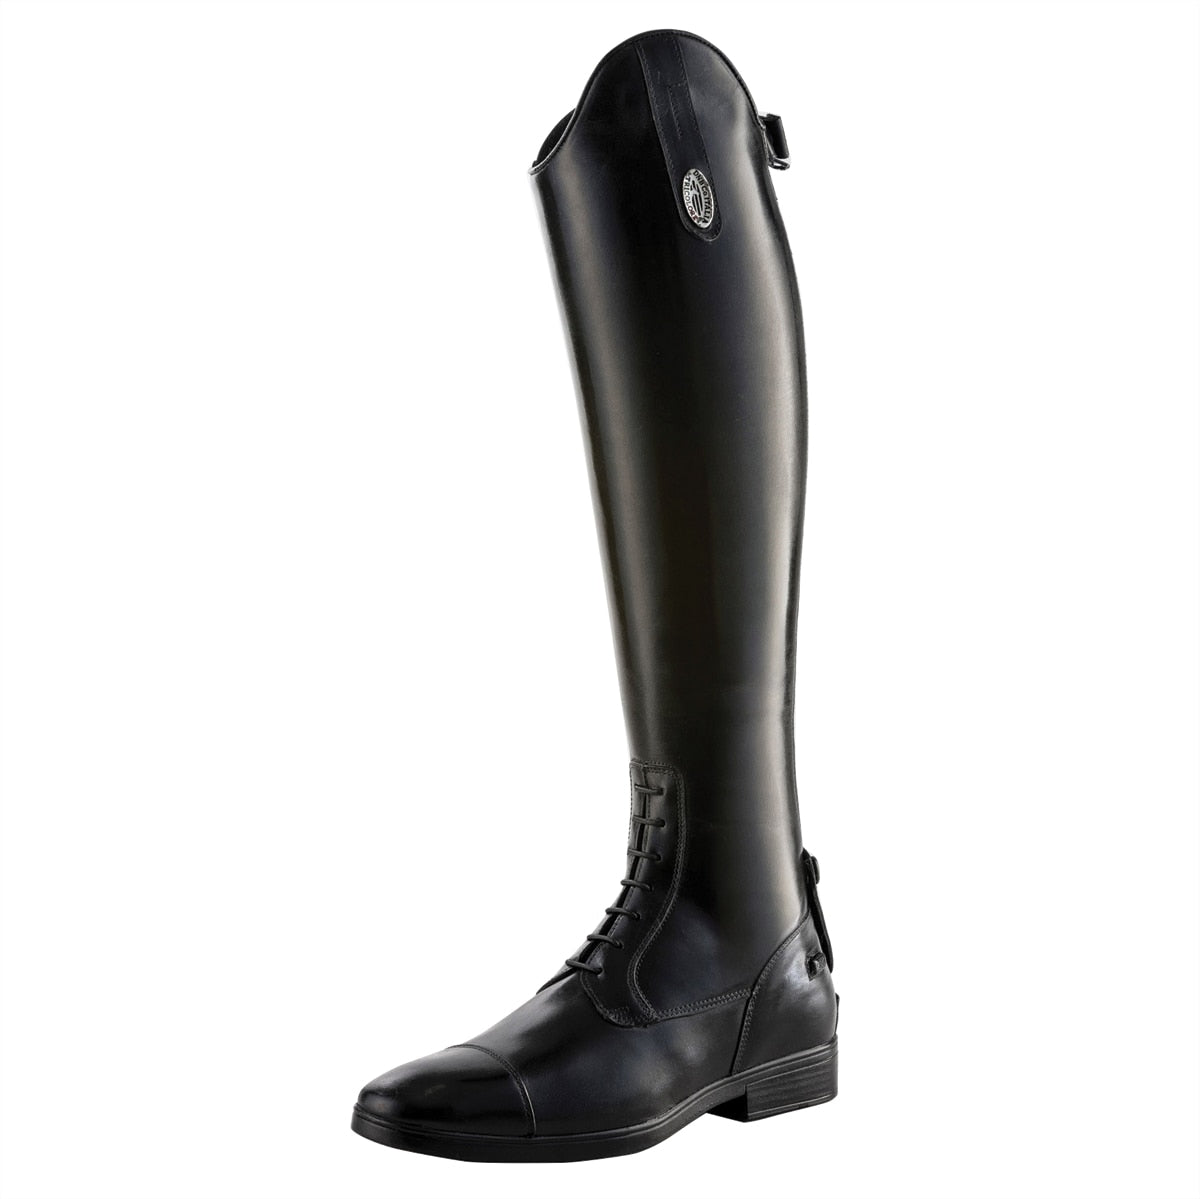 TriColore by DeNiro Amabile Field Boot Smooth Leather, Media Alta (Medium Tall) Height